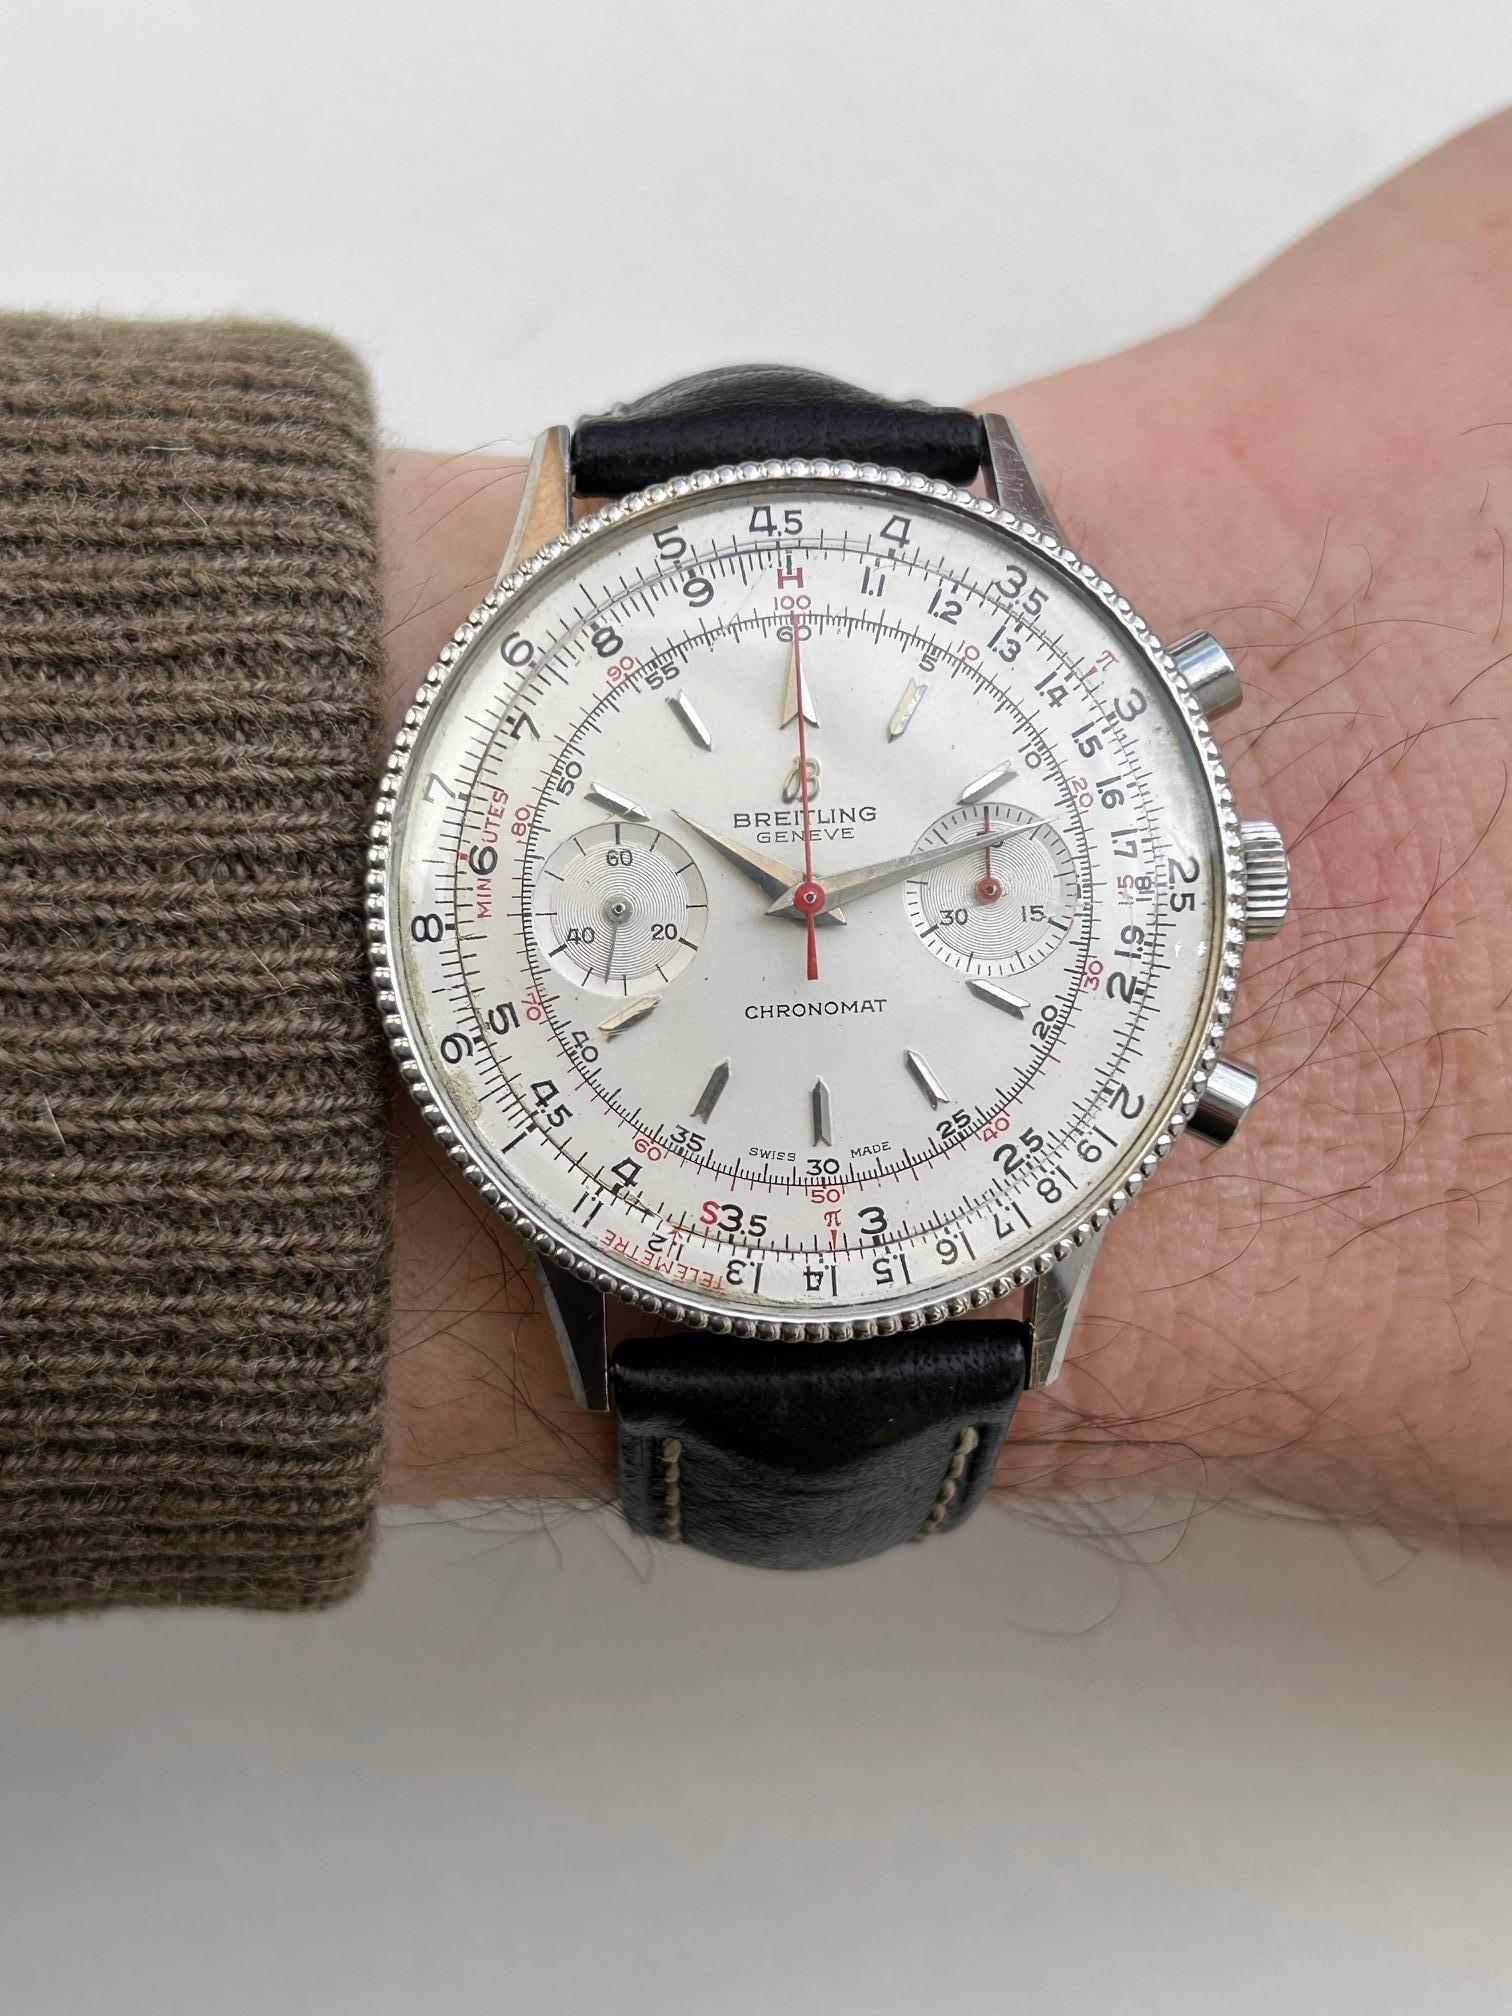 Breitling Chronomat ref 808 Wristwatch, 175 Manually Movement, Circa 1962. For Sale 2